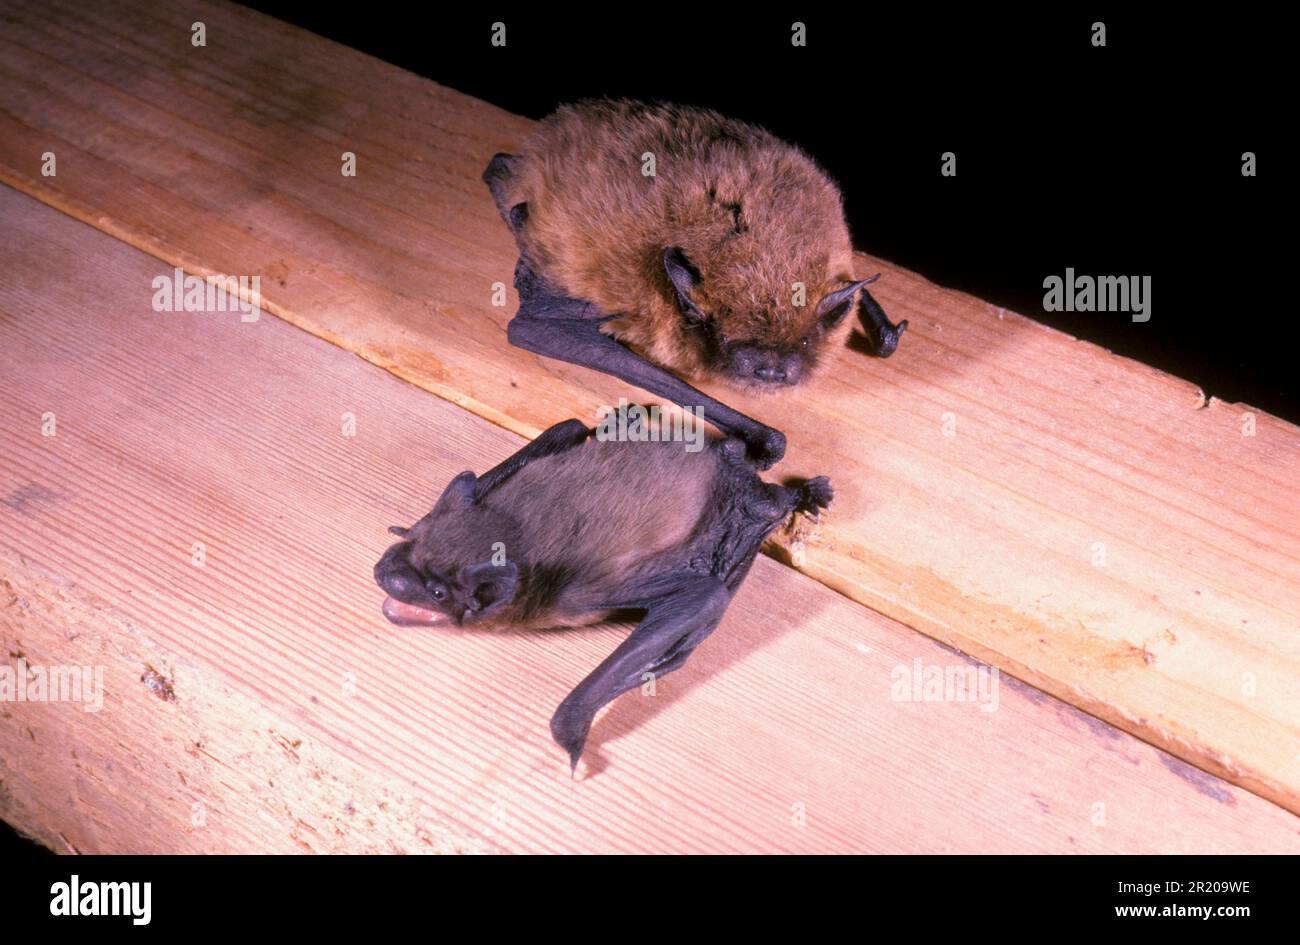 Pipistrelle Bat (Pipistrellus pipistrellus), Bats, Mammals, Animals, Pipistrelle Bat Close-up, mother with 10 day old young (S) Stock Photo